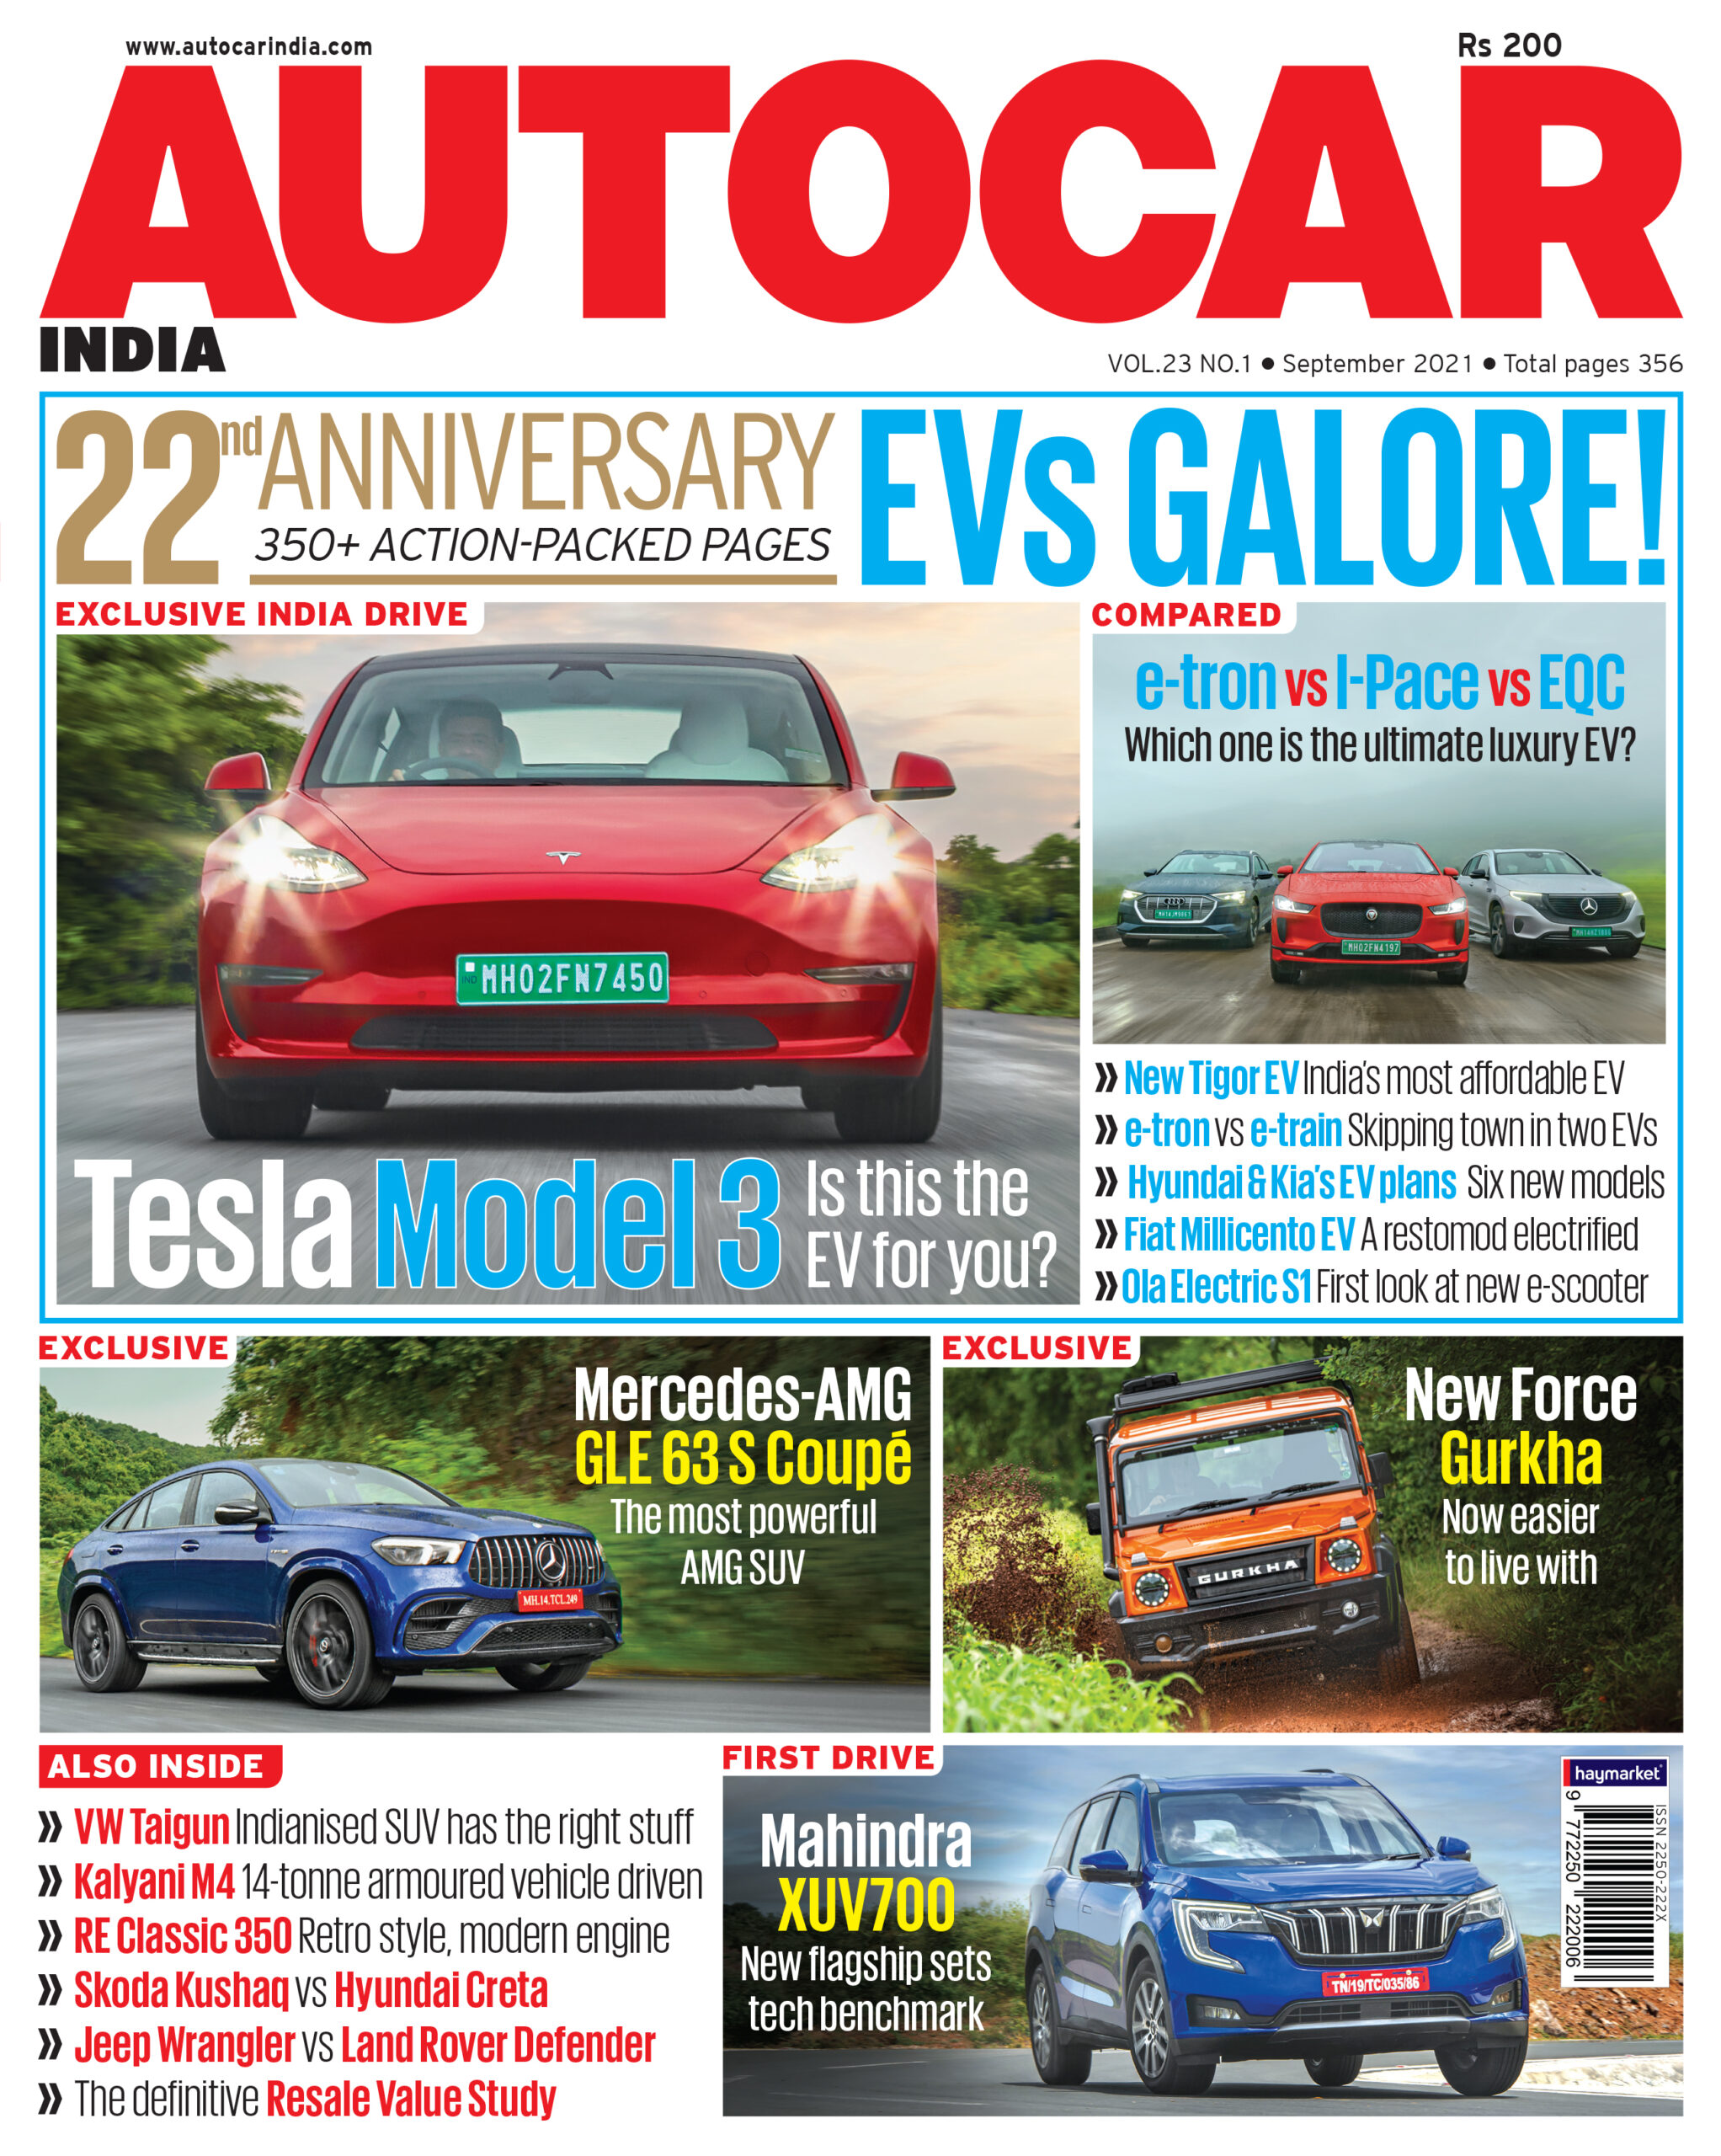 Autocar India – The Leading Automotive News Magazine in the Country